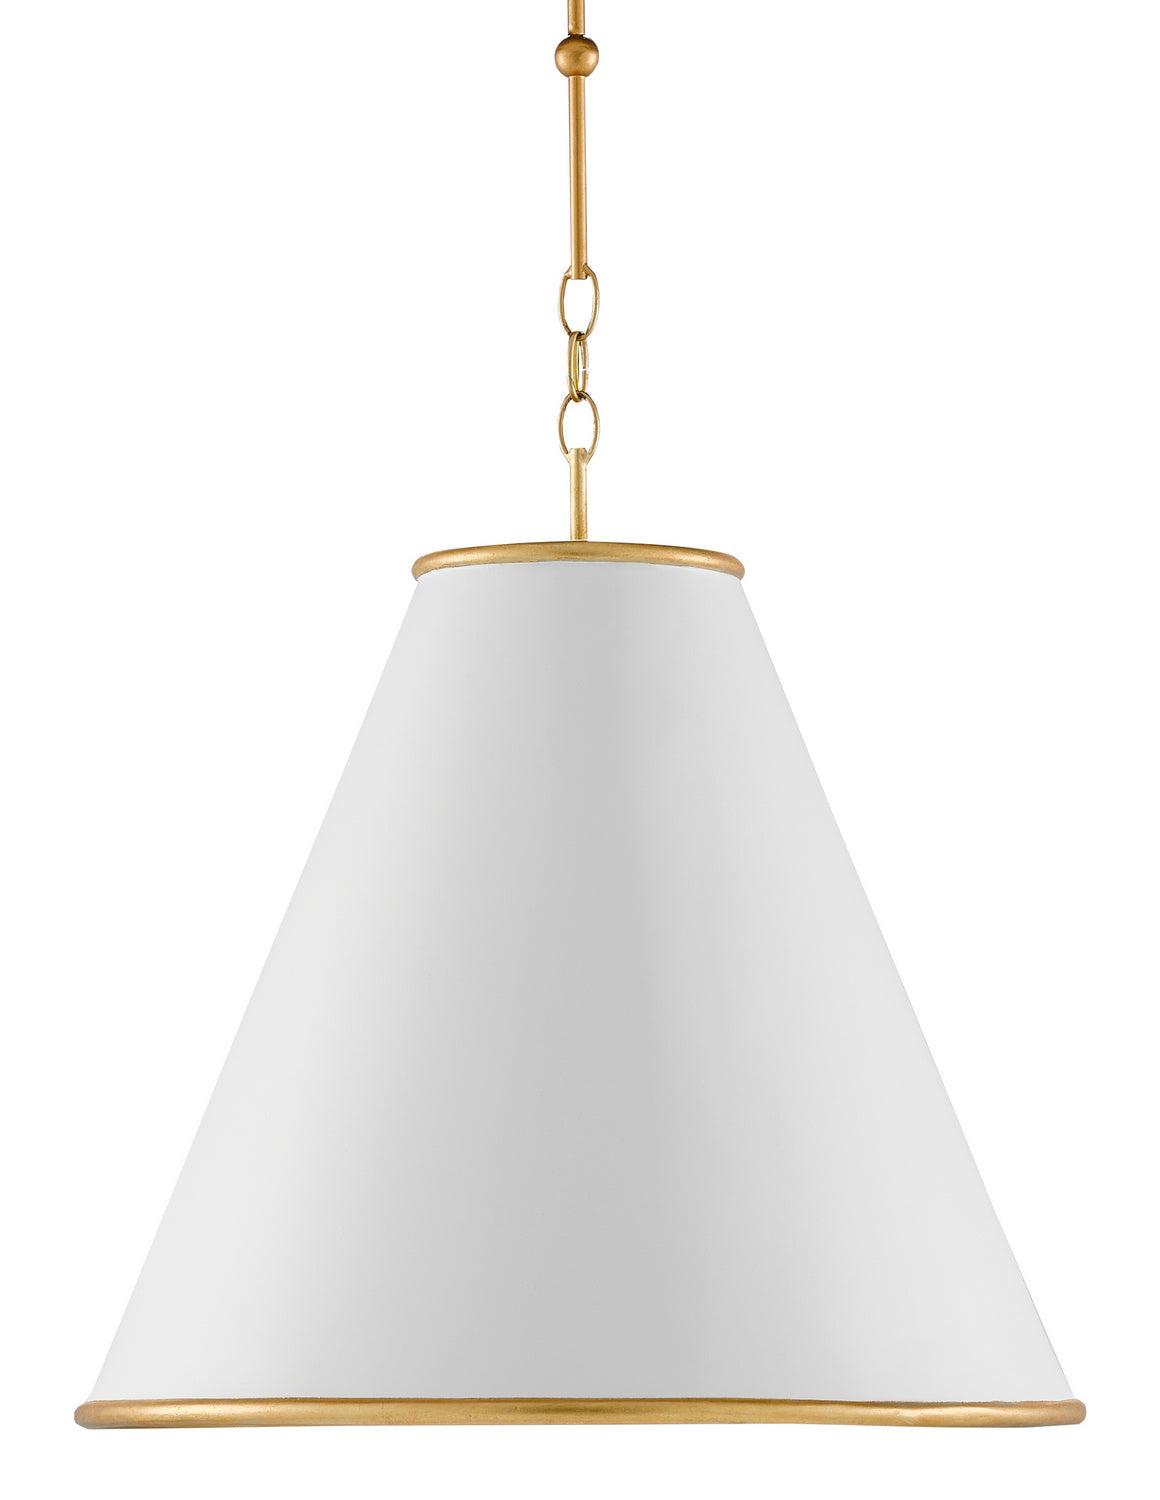 One Light Pendant from the Pierrepont collection in Painted Gesso White/Contemporary Gold Leaf/Painted Gold finish